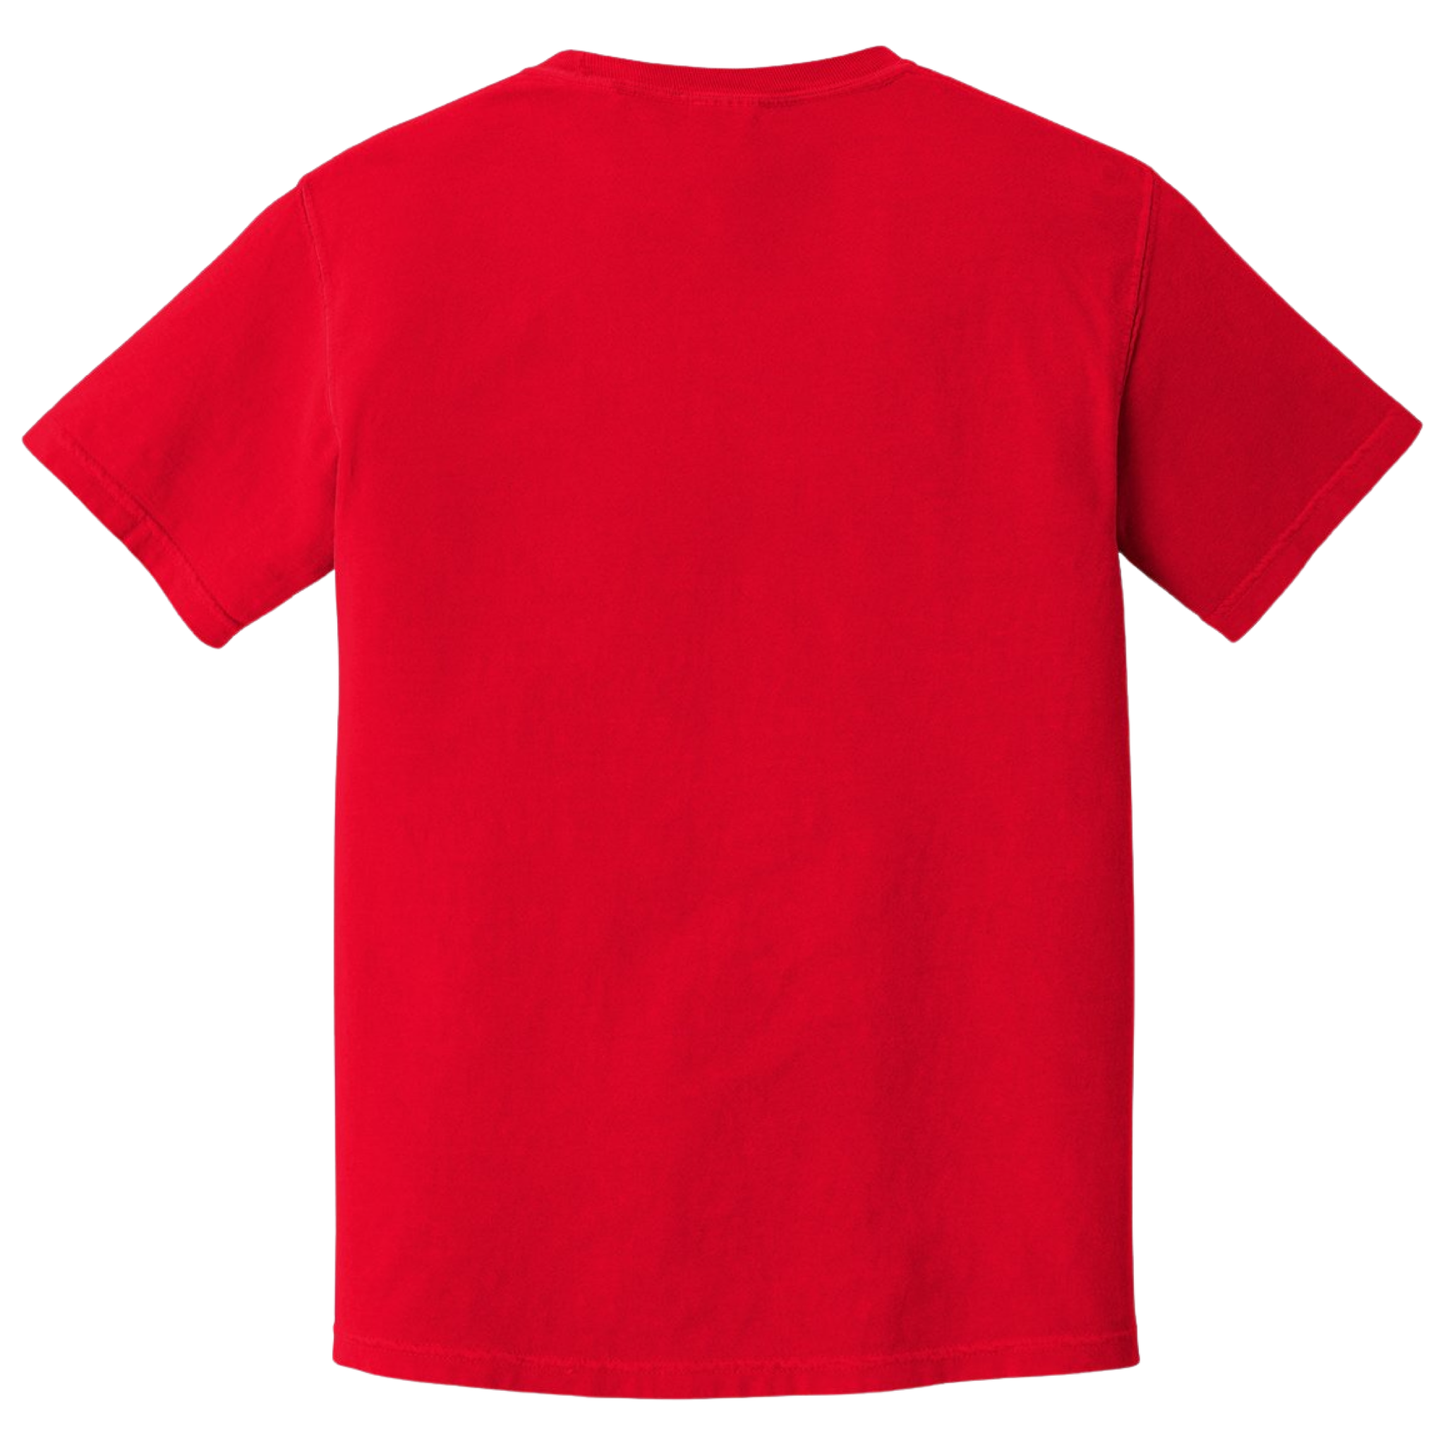 Together We Rise Adult Tee Red